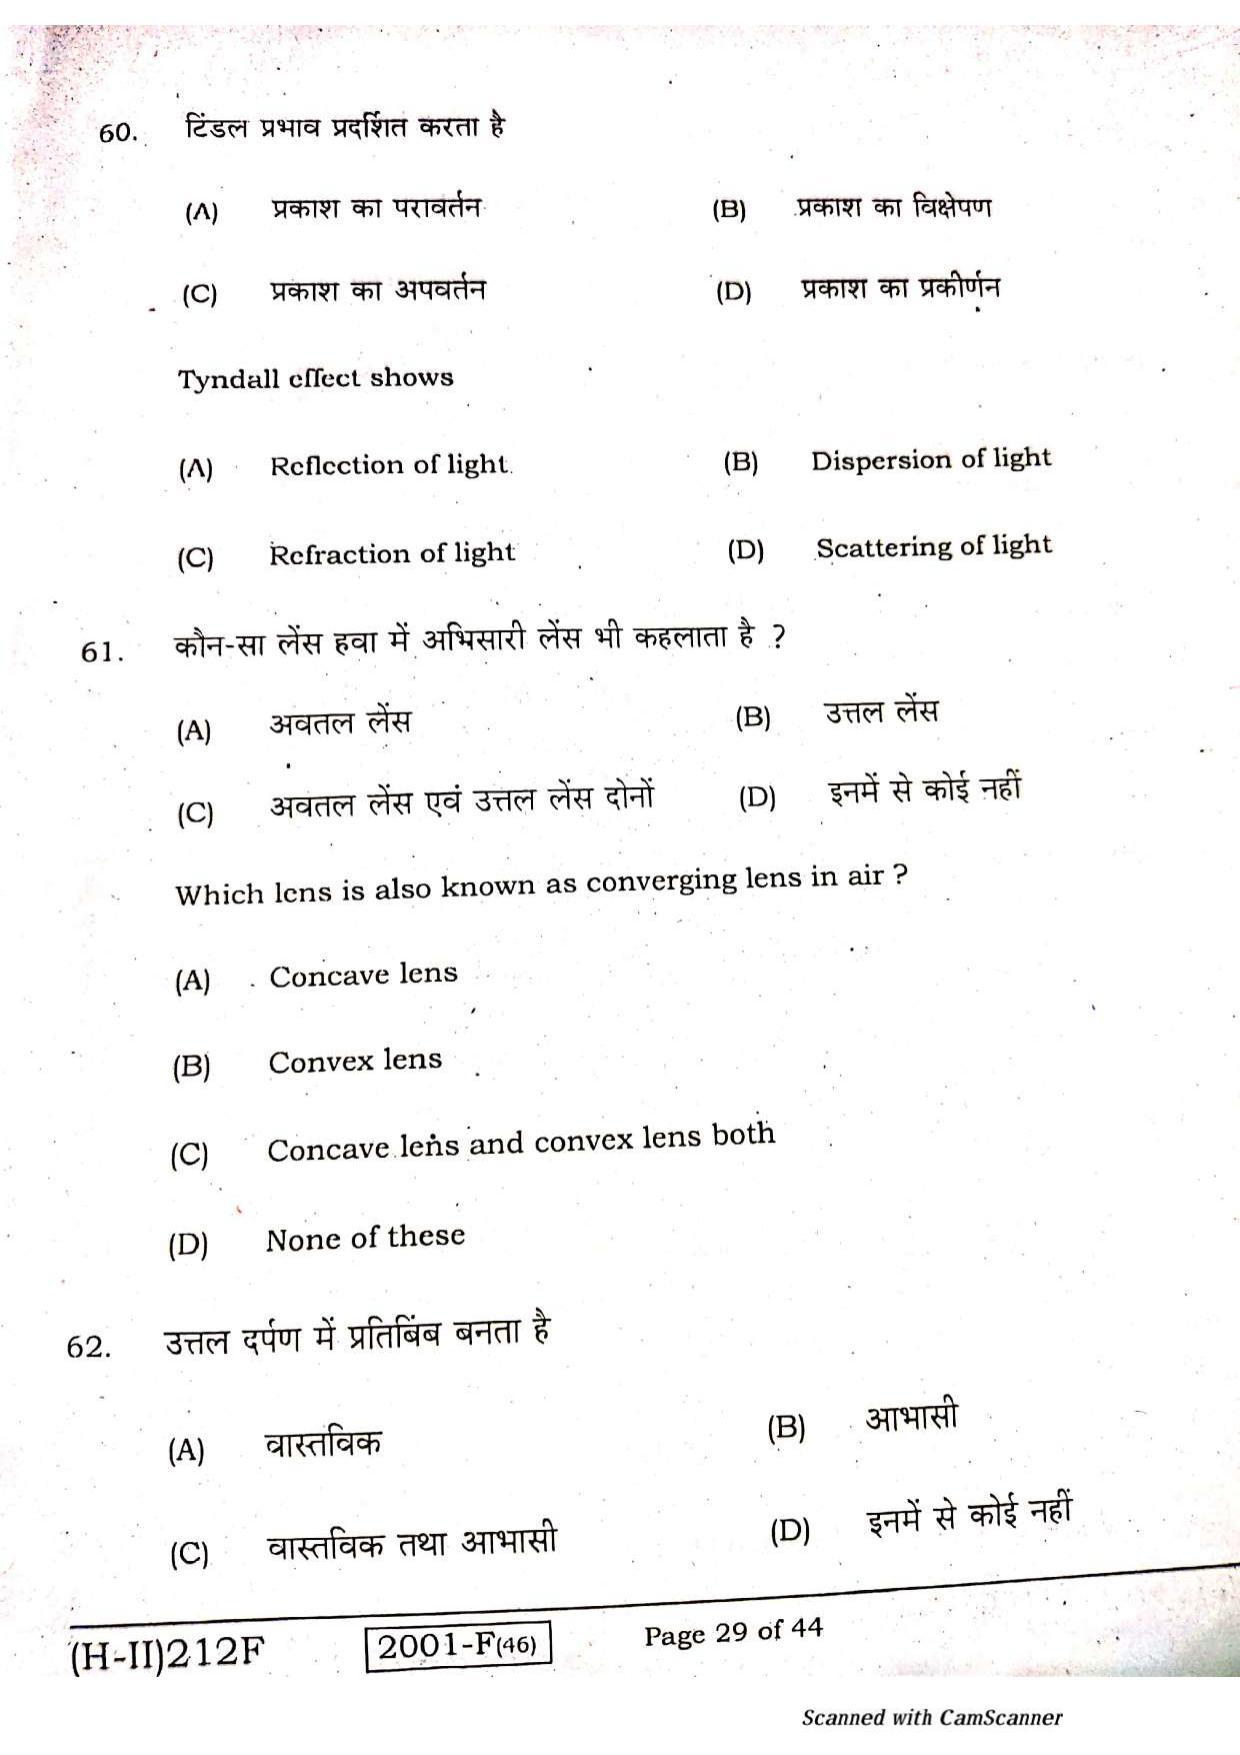 Bihar Board Class 10 Science 2021 (2nd Sitting) Question Paper - Page 27